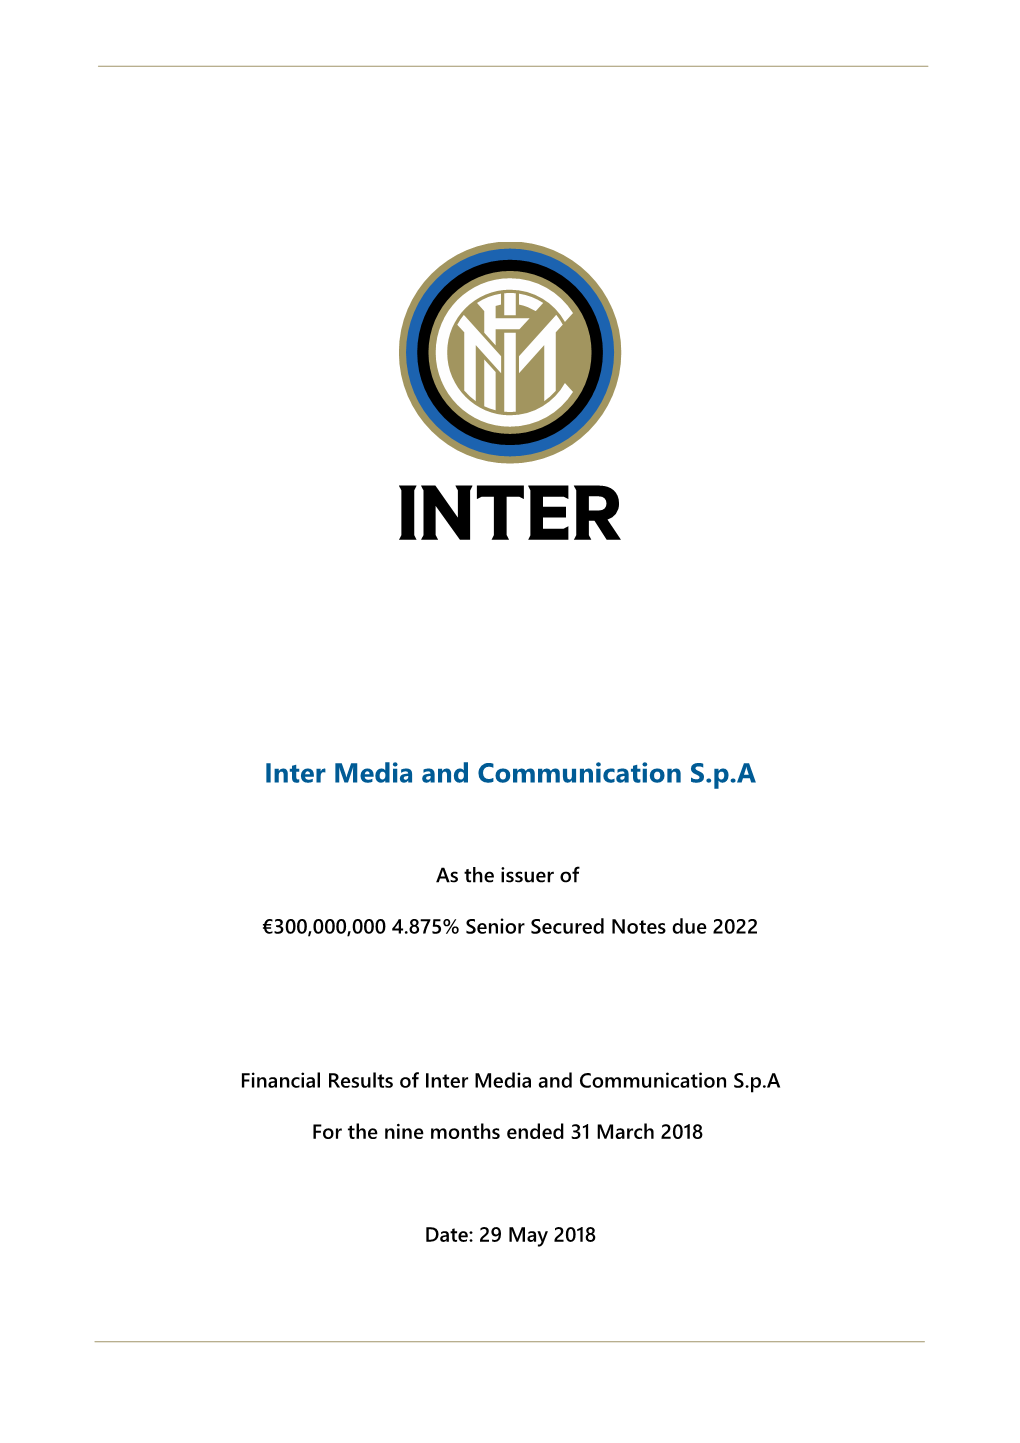 Inter Media and Communication S.P.A